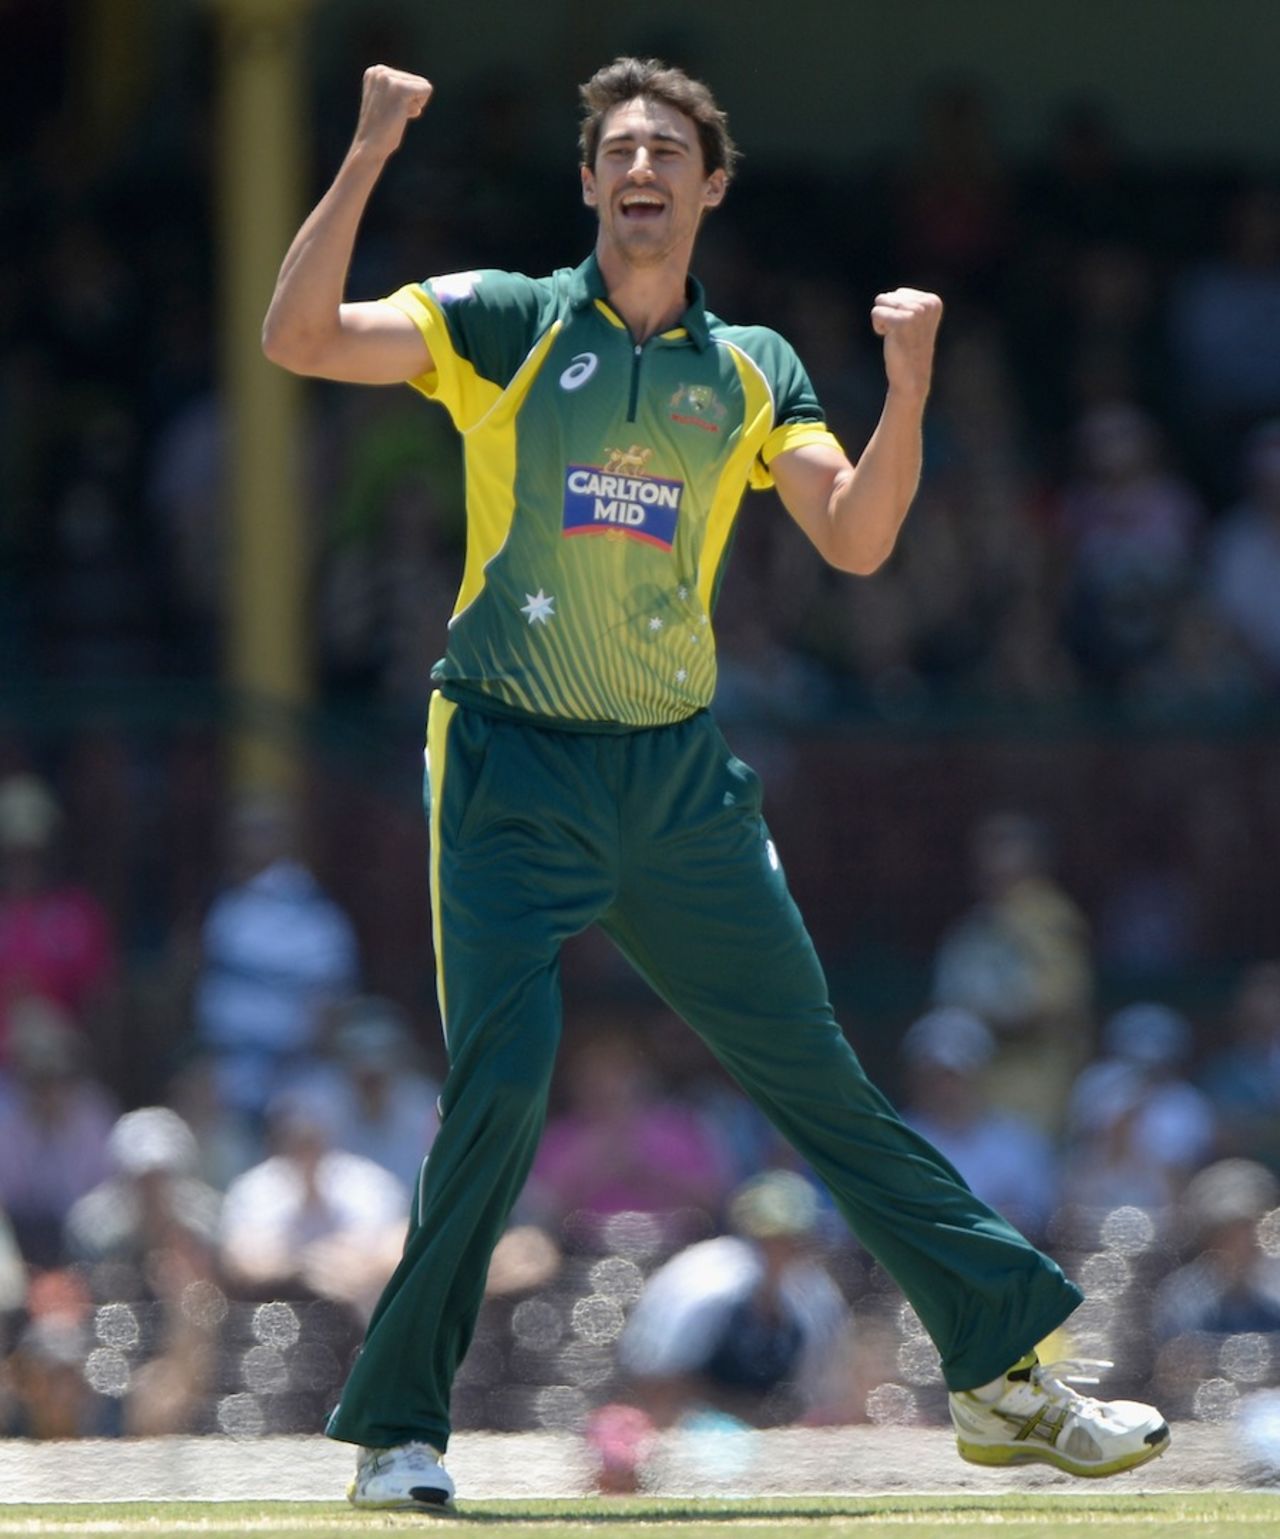 Mitchell Starc struck with the first ball of the match, Australia v England, Carlton Mid Tri-Series, Sydney, January 16, 2015